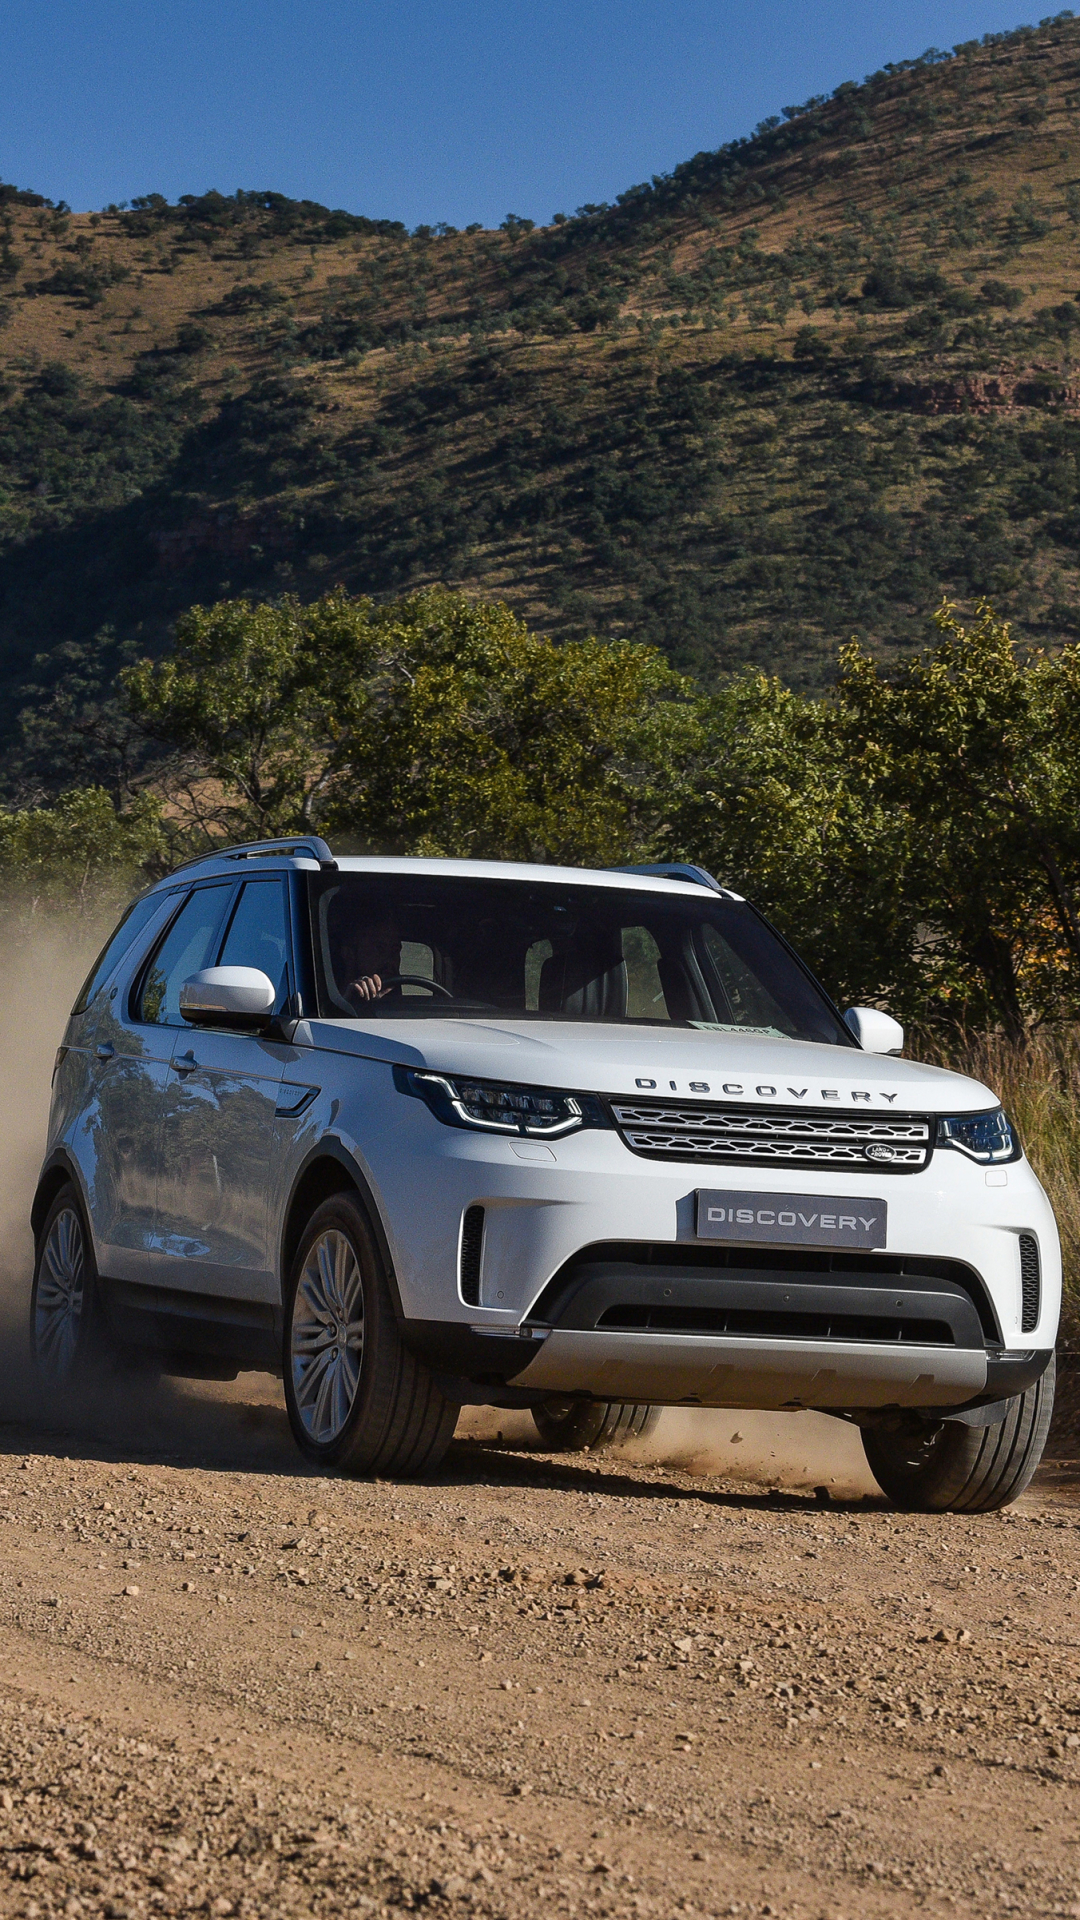 Vehicles Land Rover Discovery Wallpaper Id